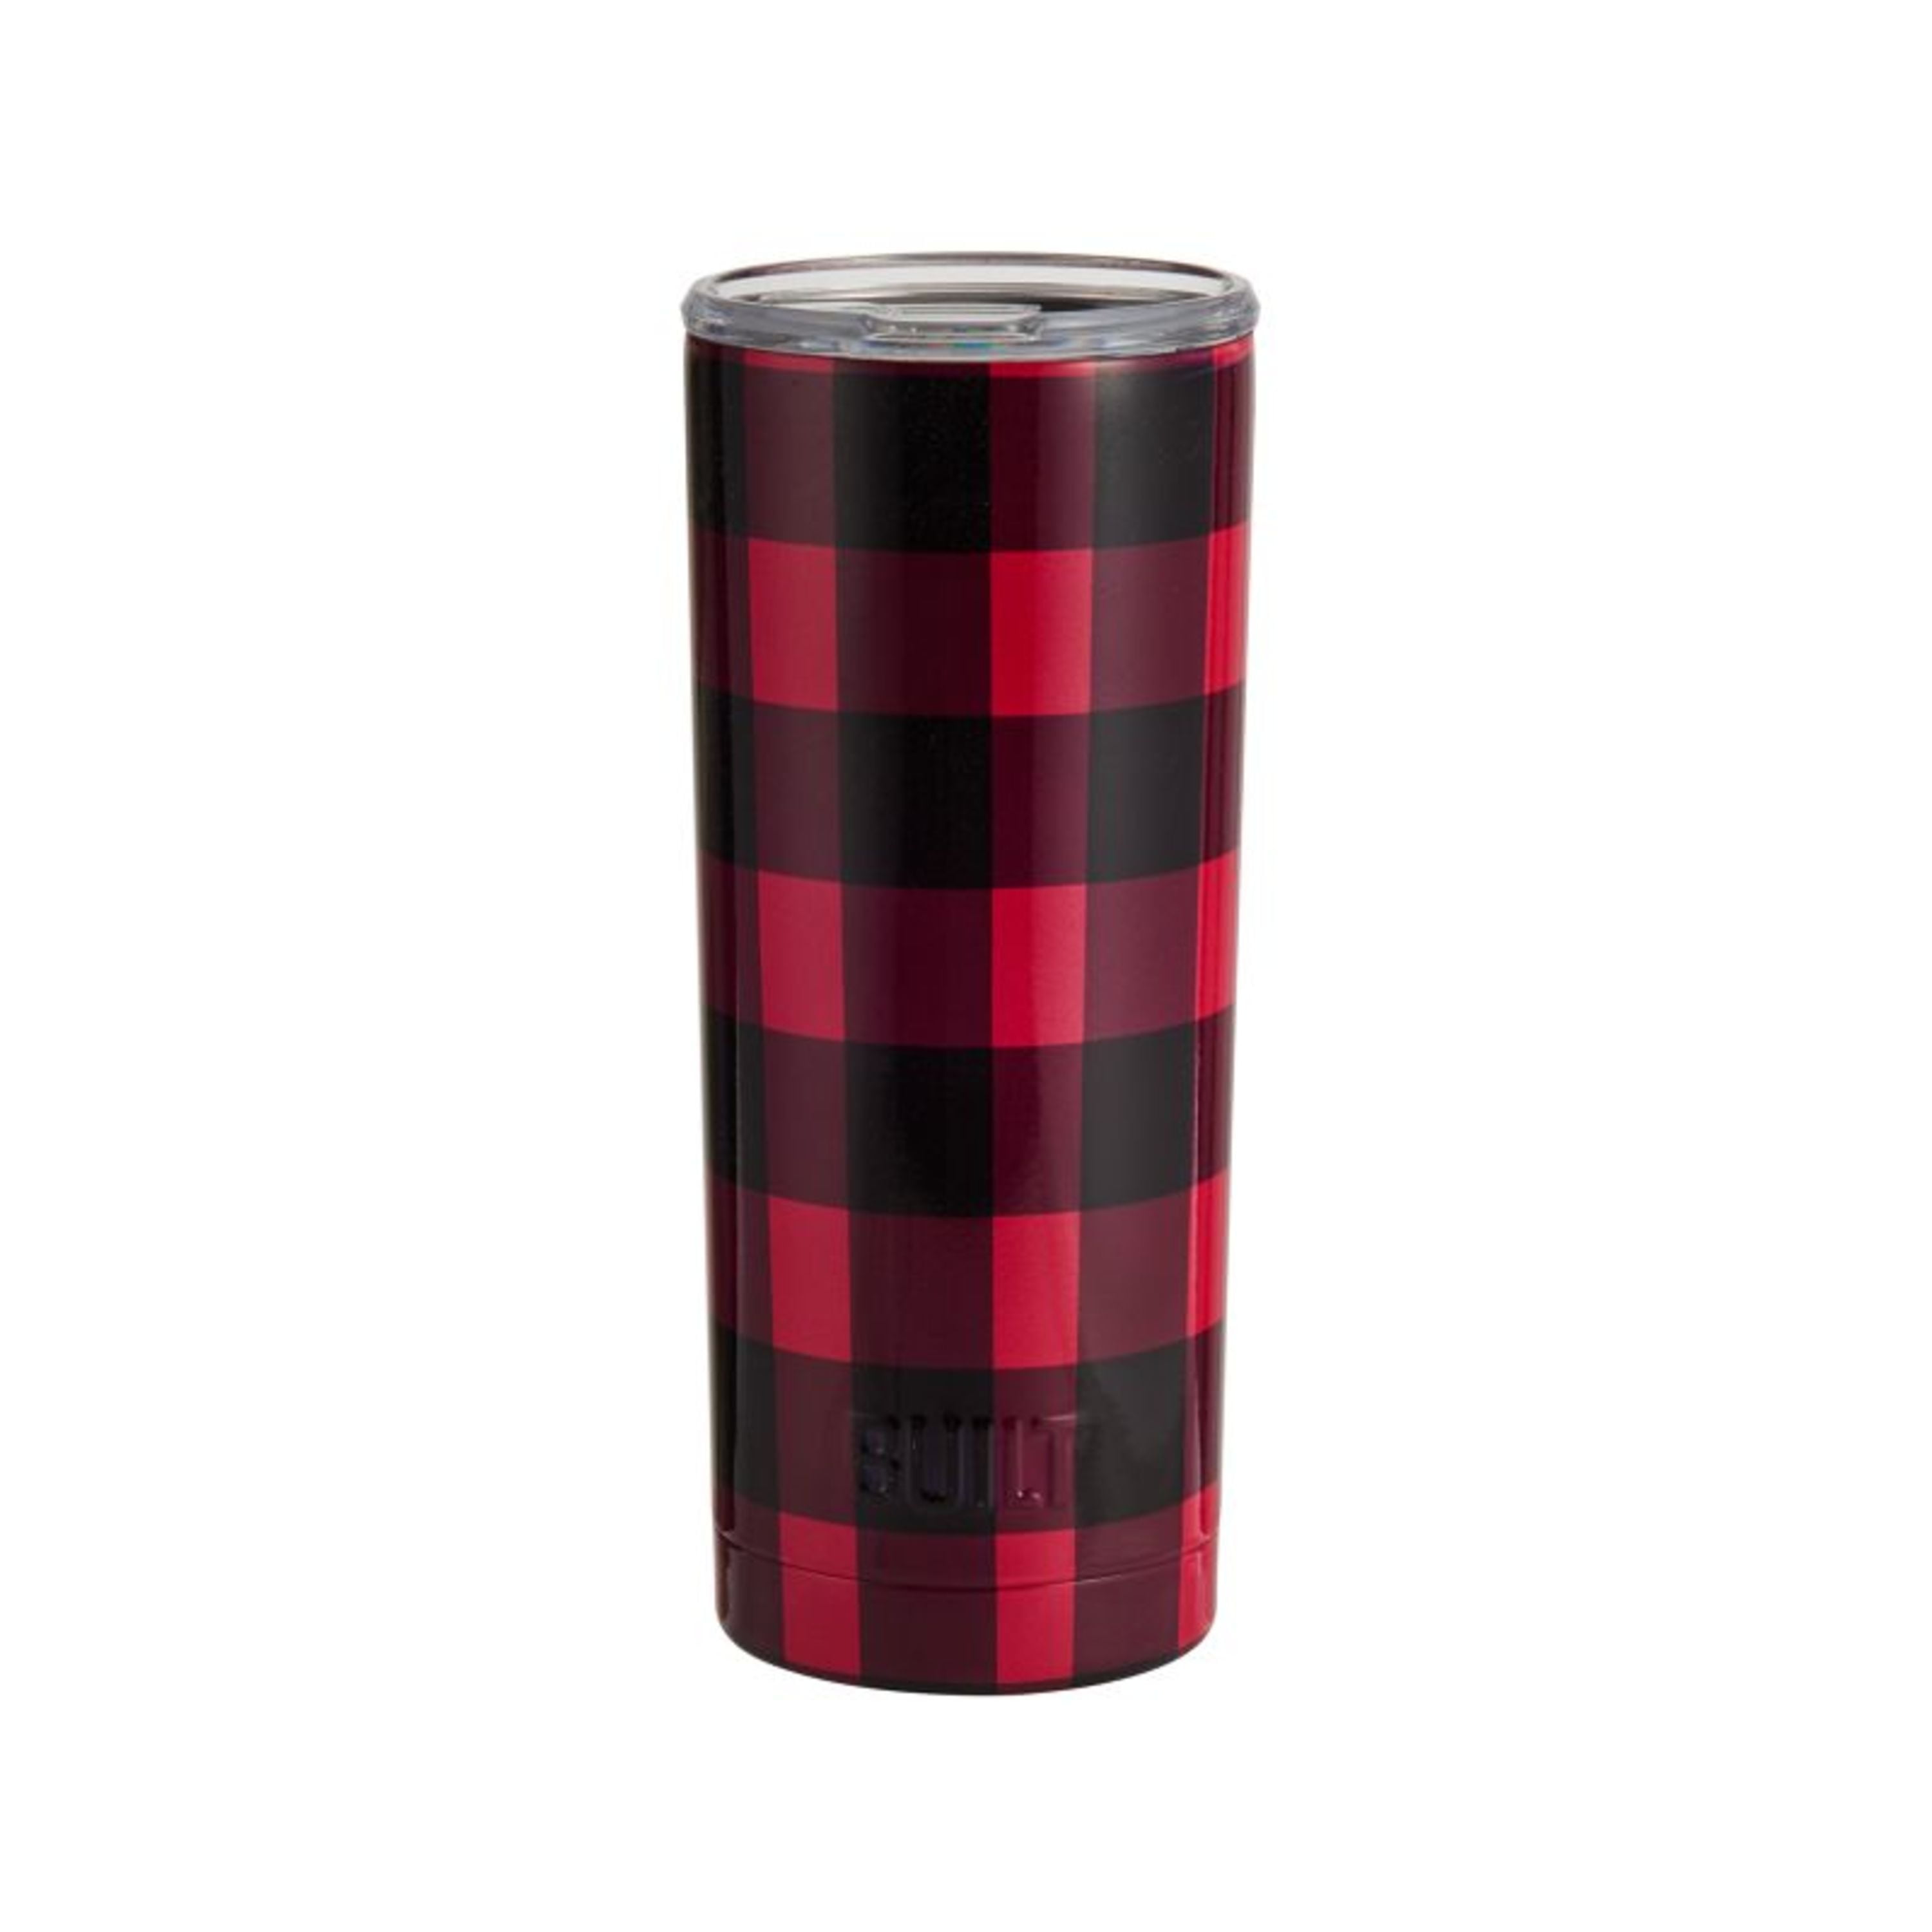 Everyday Living Double Walls Stainless Steel Beverage Tumblers. 2